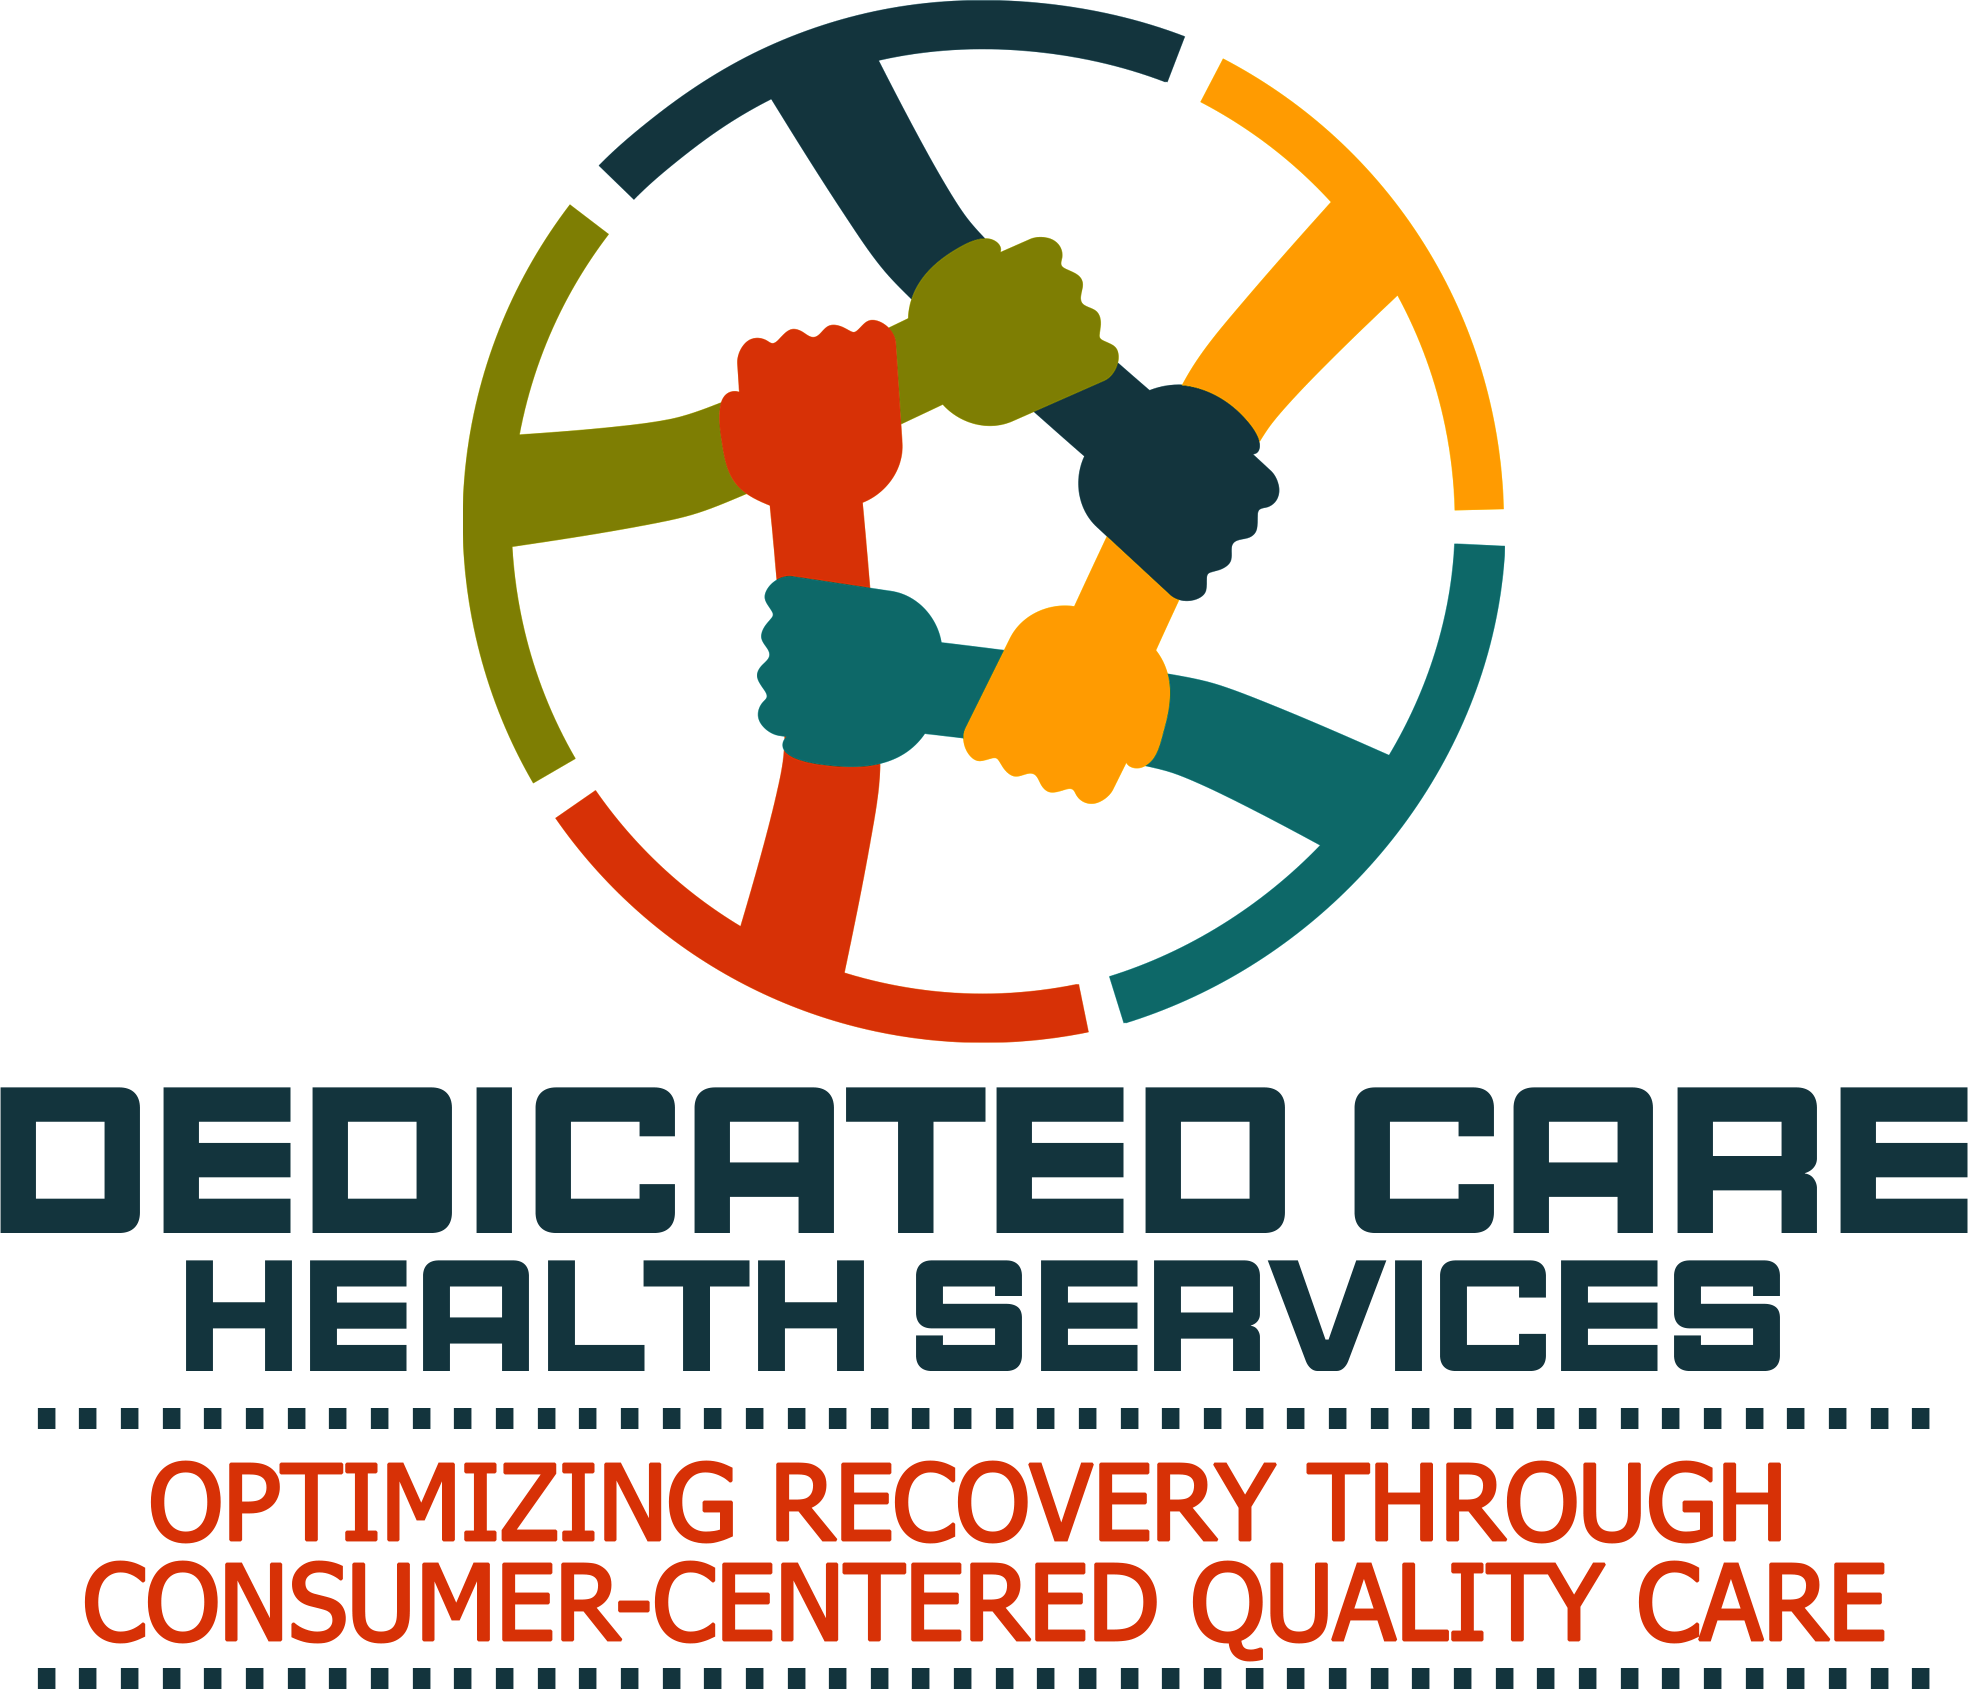 Dedicated Care Health Services